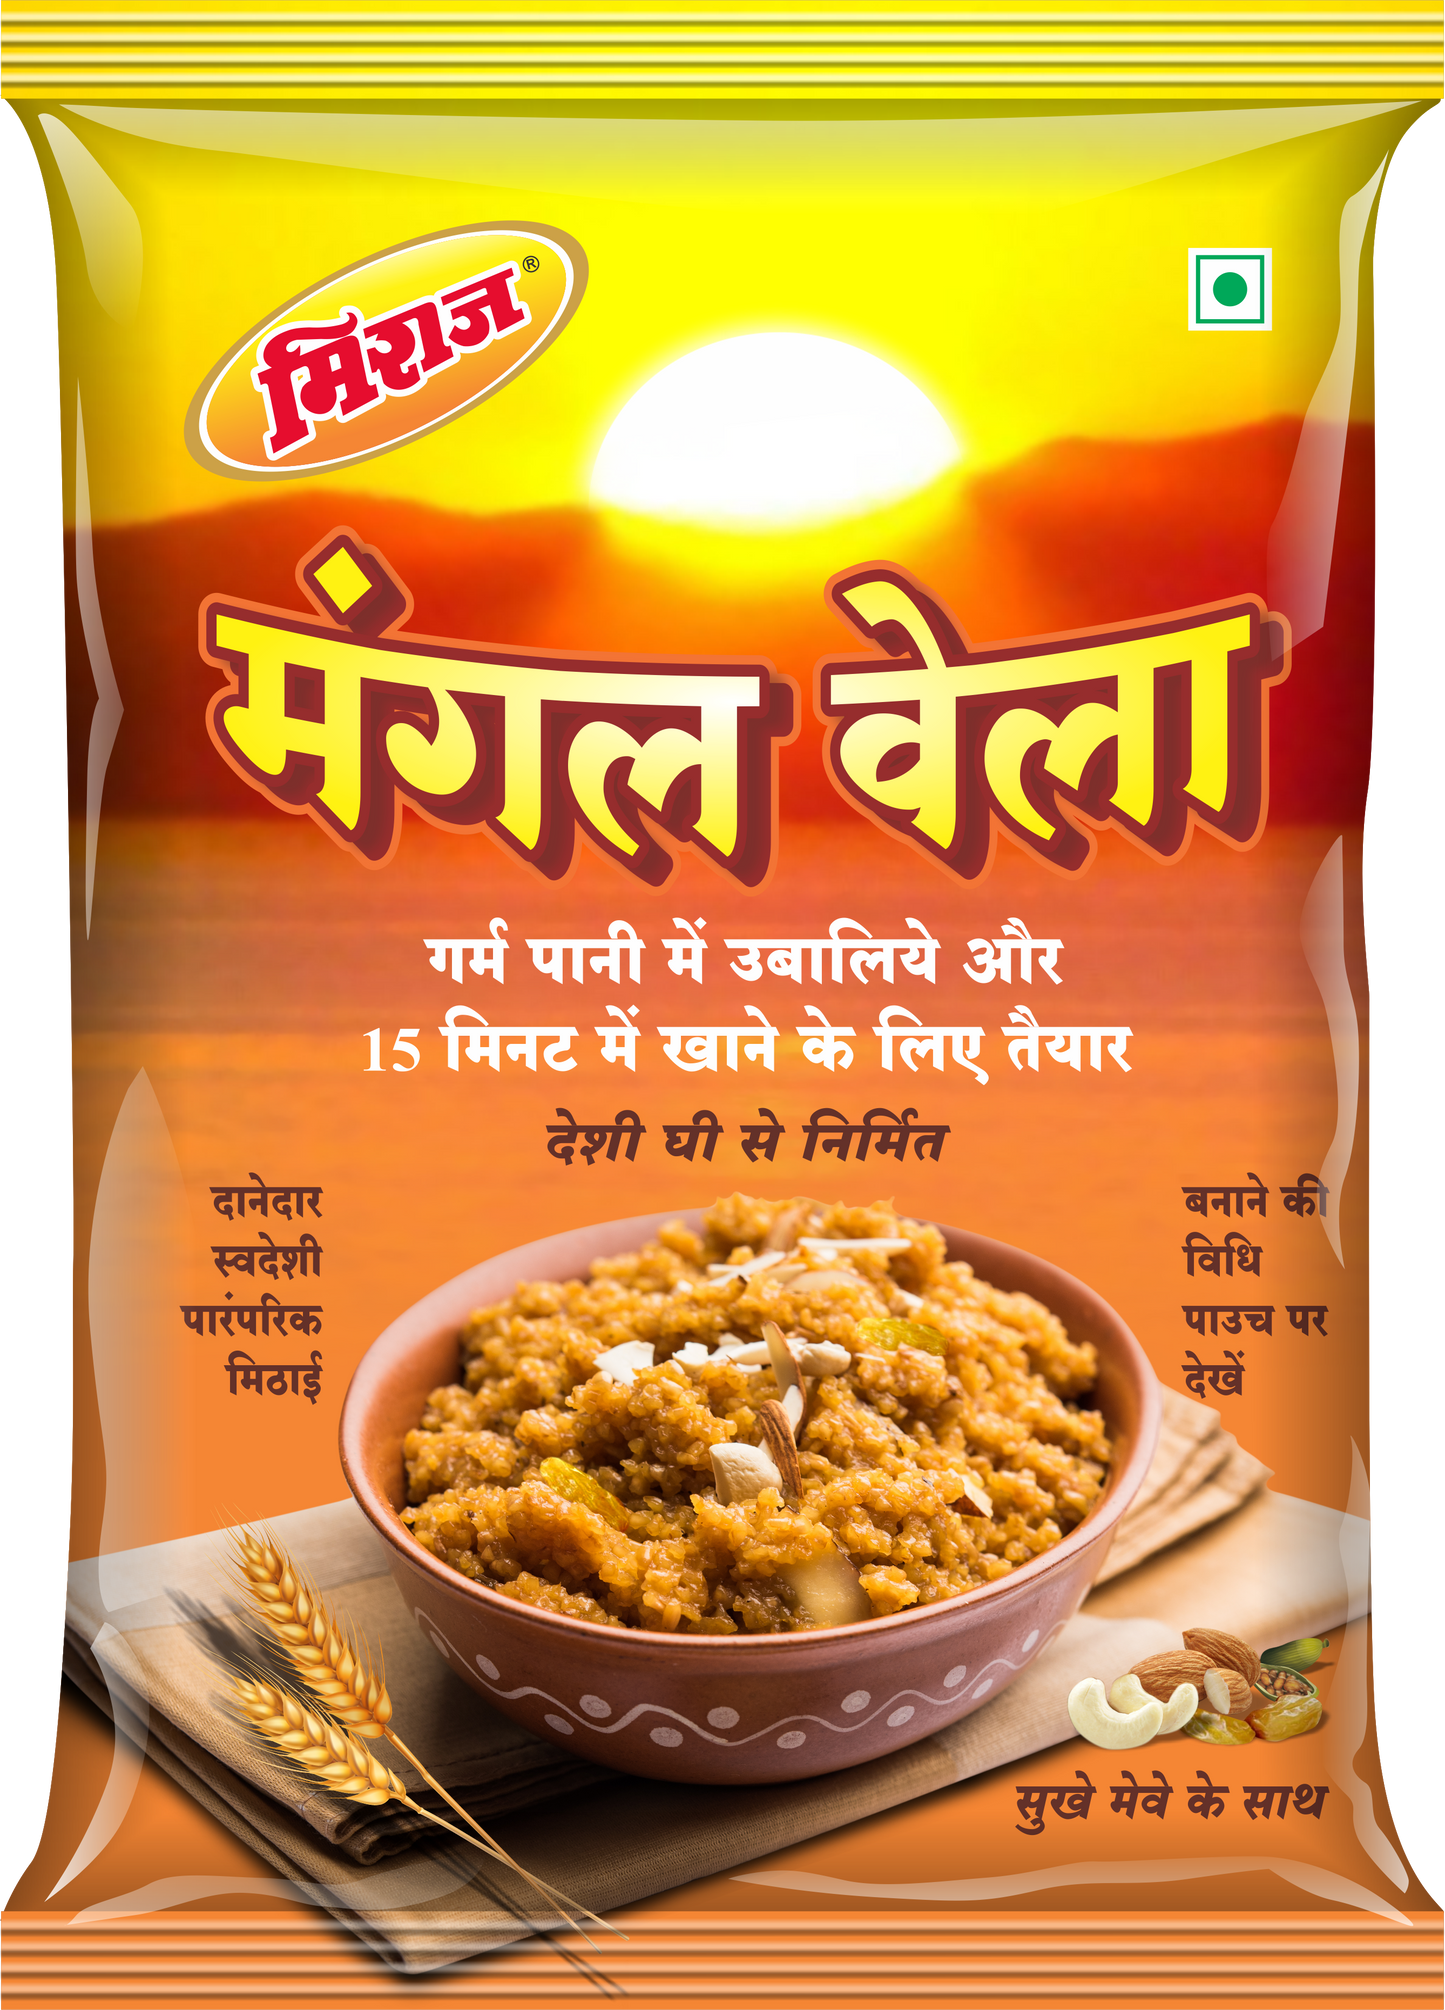 Miraj Mangal Vela Instant Lapsi (Quick and Healthy Broken Wheat Delight, Nutrient Rich with Desi Ghee)